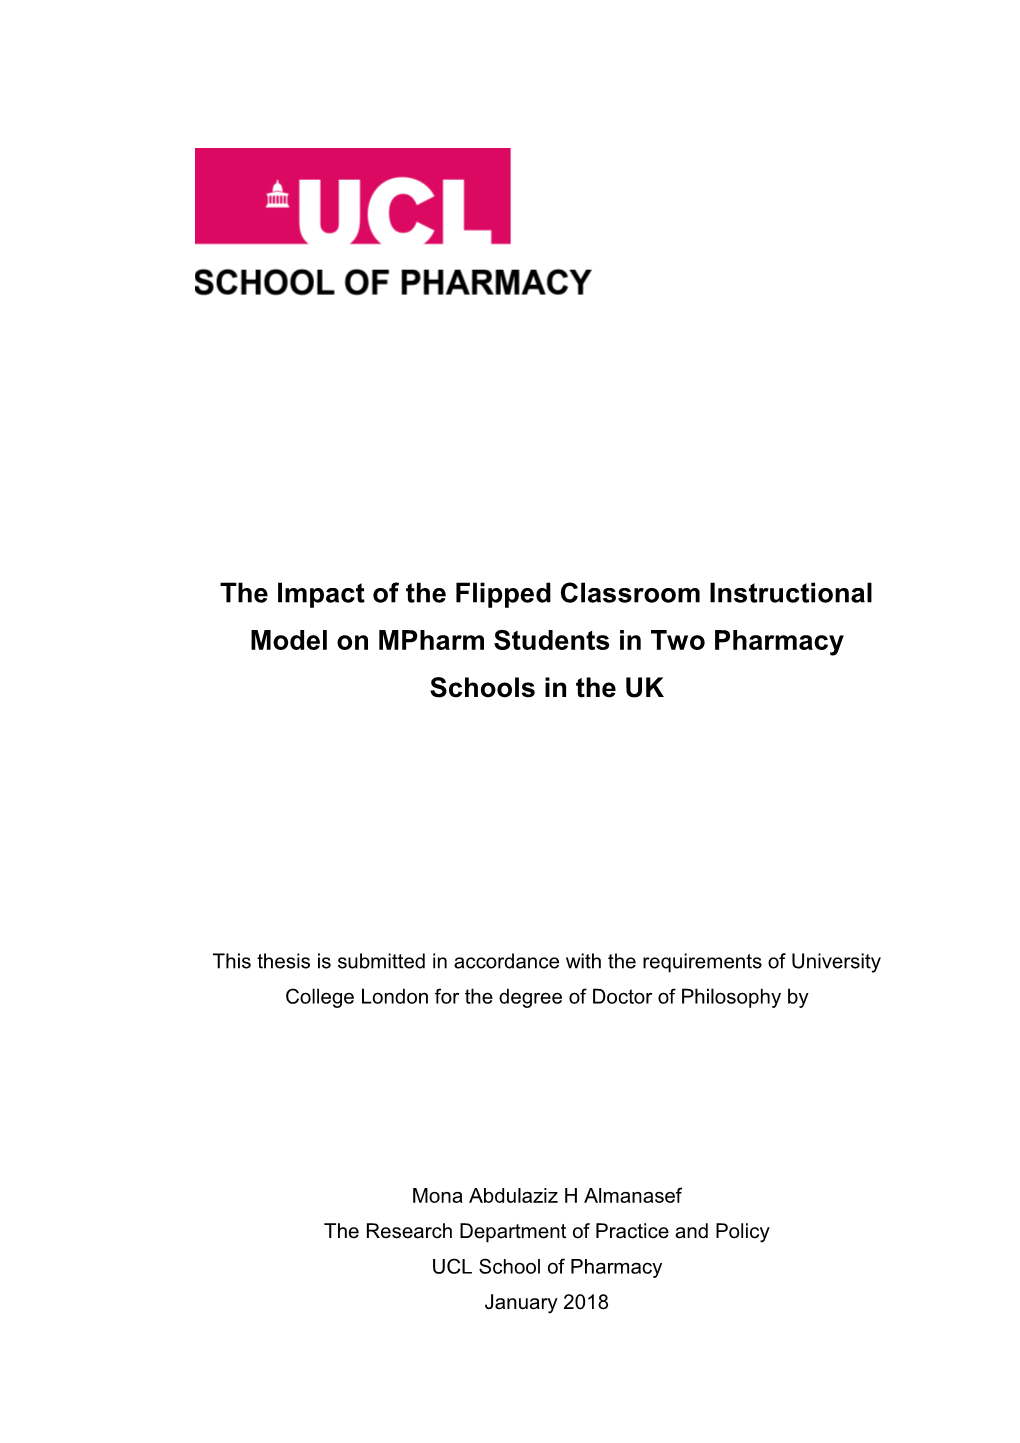 The Impact of the Flipped Classroom Instructional Model on Mpharm Students in Two Pharmacy Schools in the UK